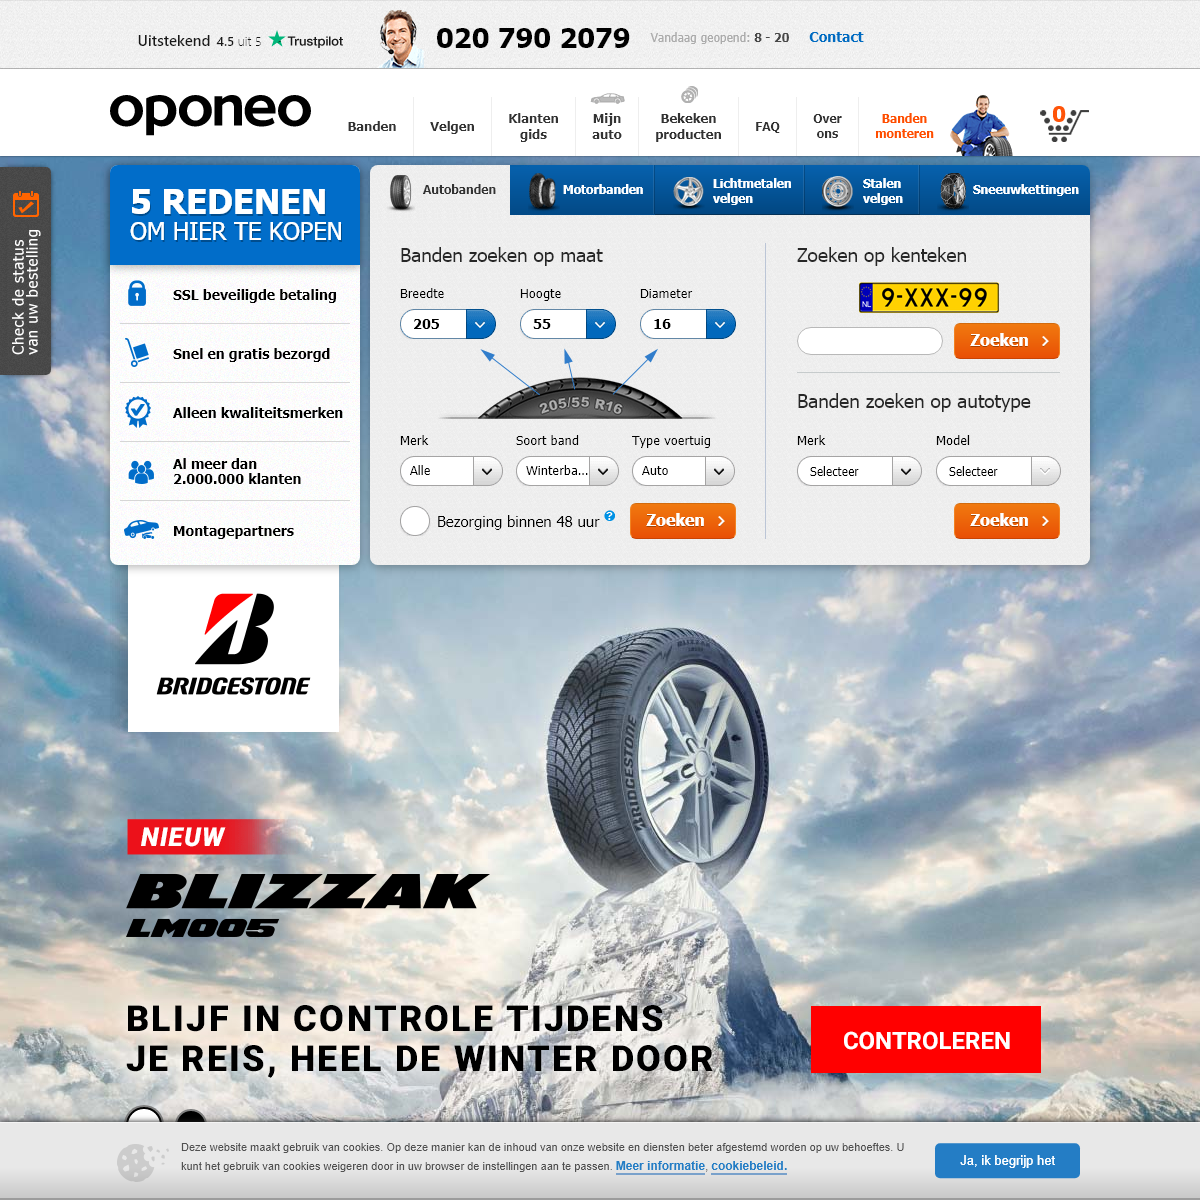 A complete backup of oponeo.nl